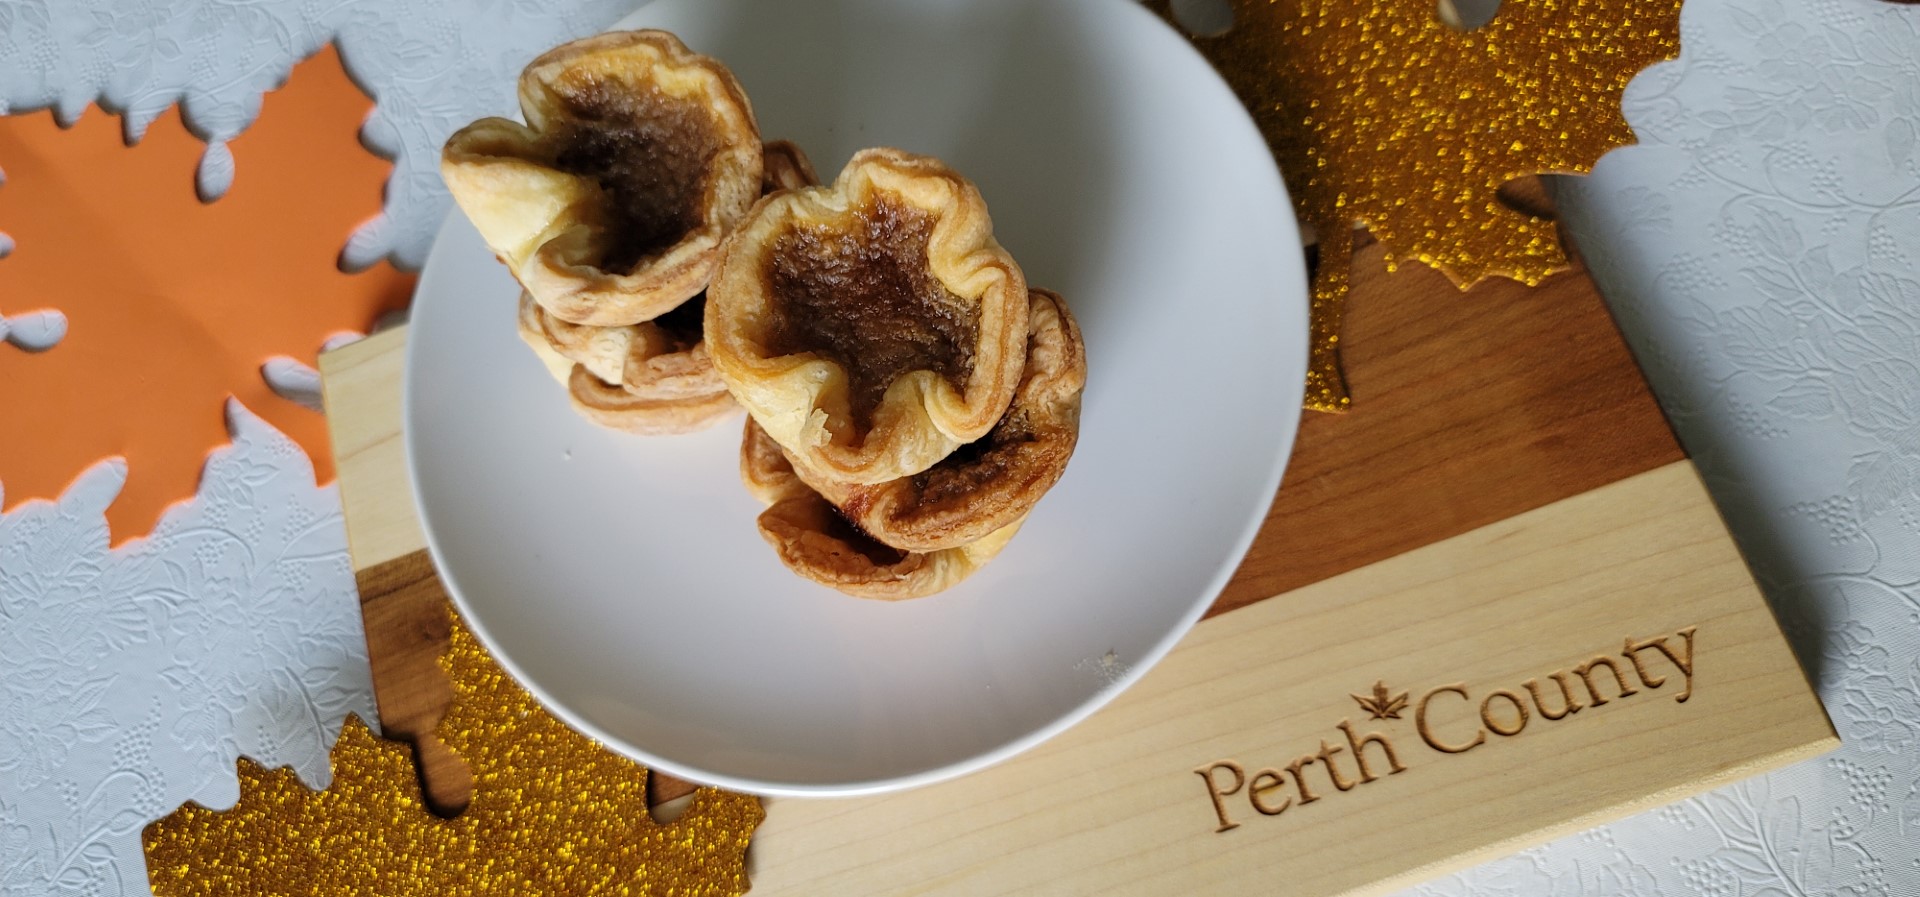 Butter tarts piled on a plate Perth County